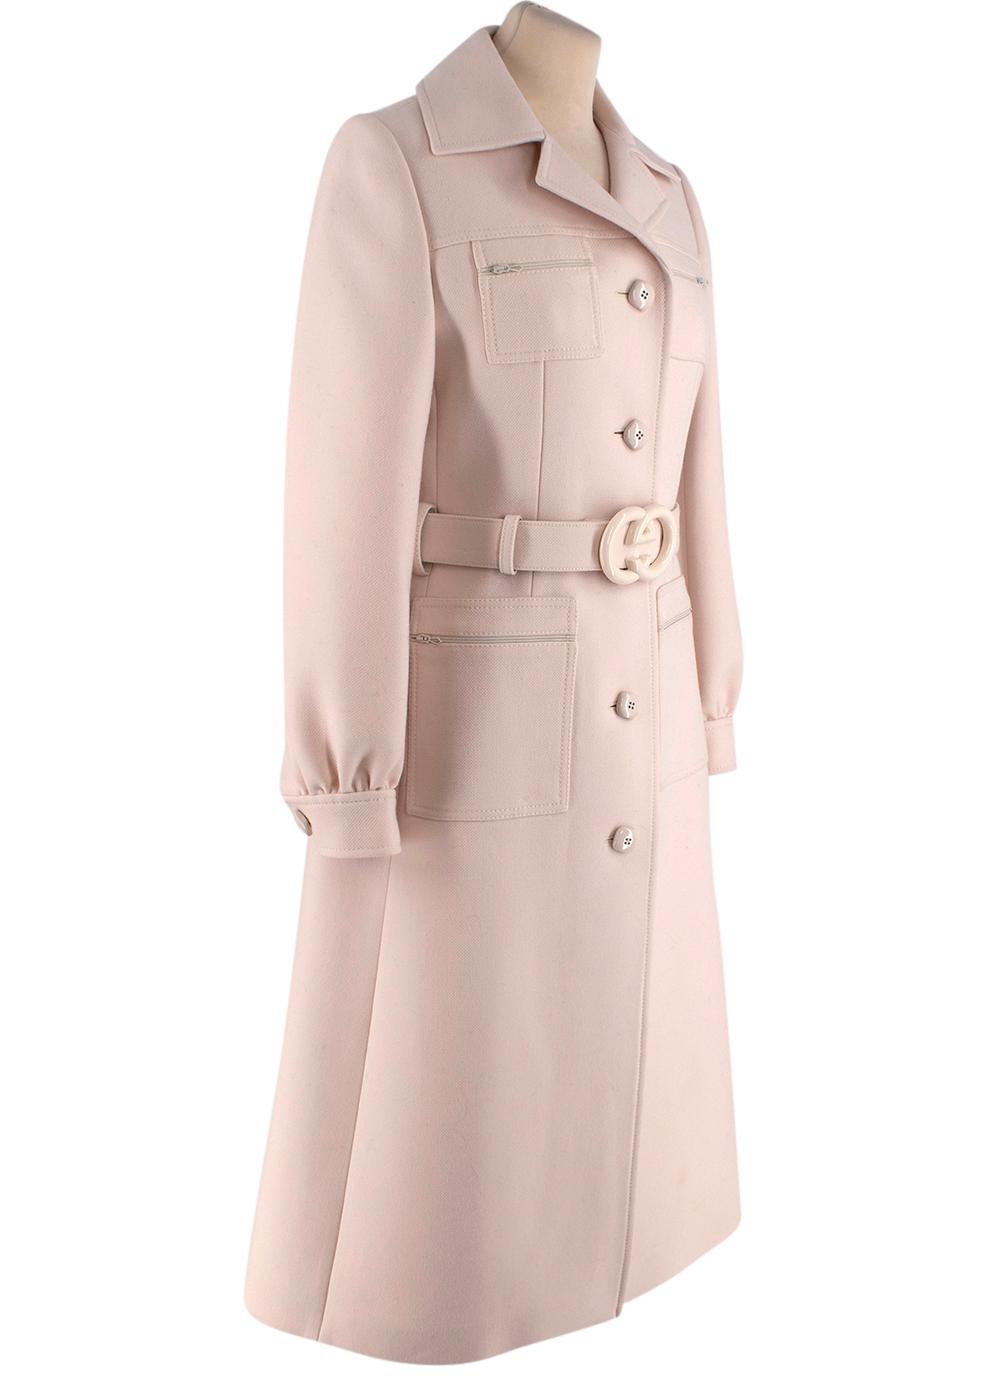 Gucci Gardenia GG-belt wool coat

- Notched lapels, long sleeves
- Single-breasted button fastening
- Long sleeves, button-fastening cuffs
- Four front patch zip pockets
- GG buckle-fastening belt
- Cream satin lining

Materials:
100% Wool
Lining -